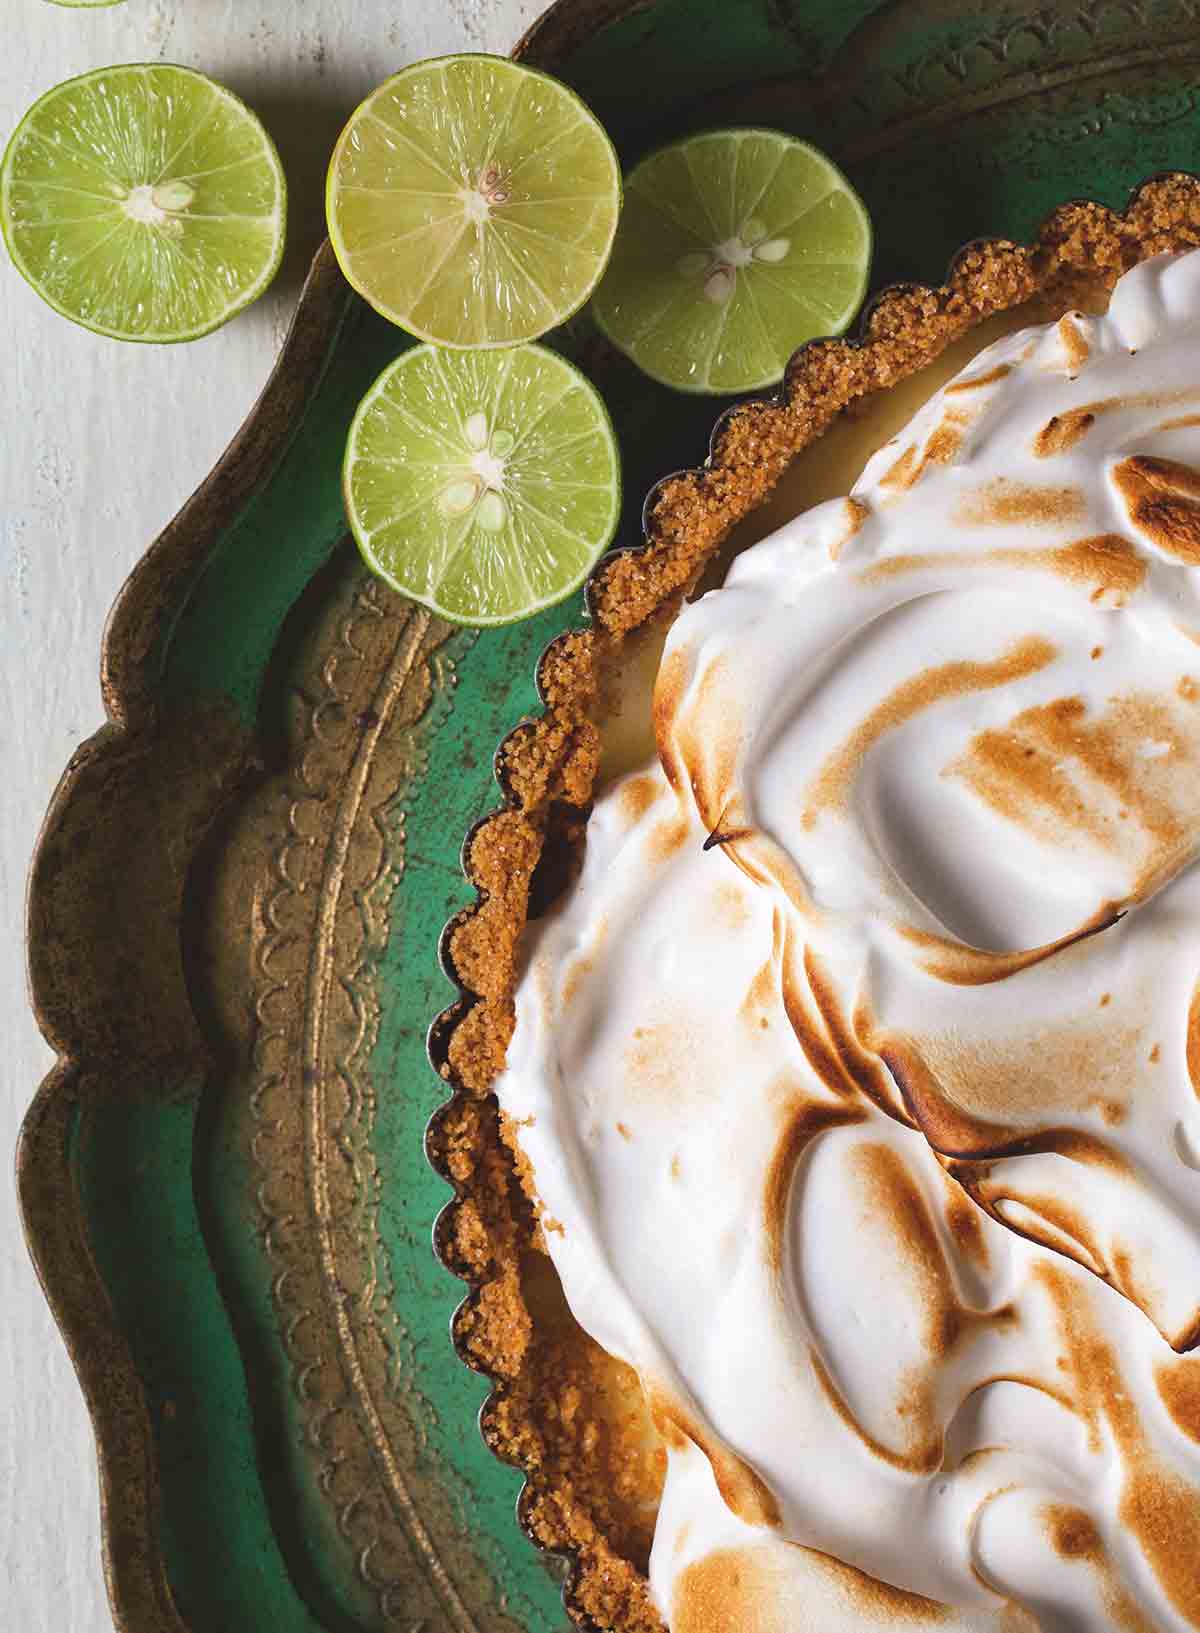 A classic key lime pie with a meringue top and several sliced limes nearby